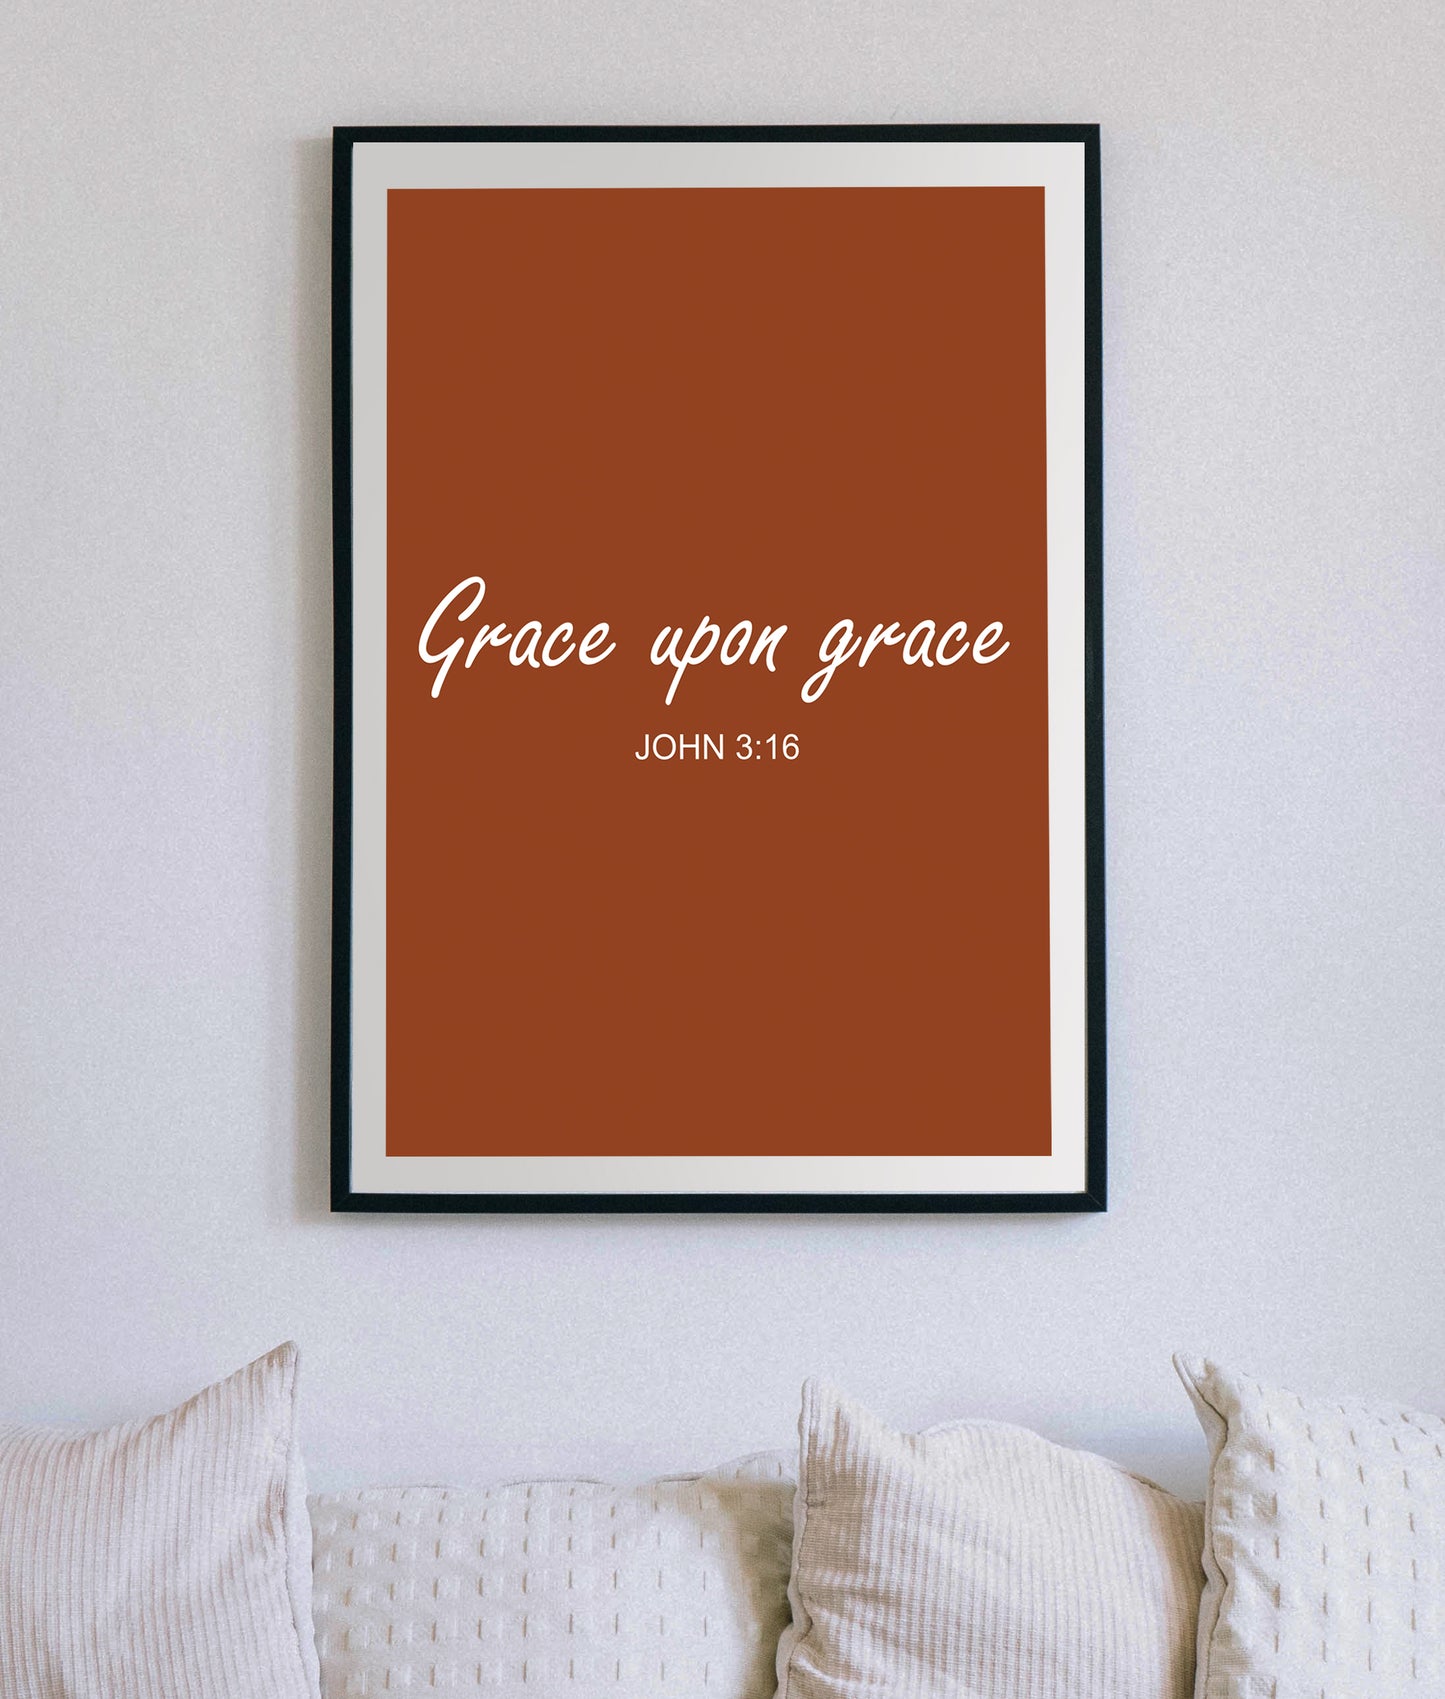 Grace upon Grace Christian Quote, Scripture, Bible Verse Poster Wall Art